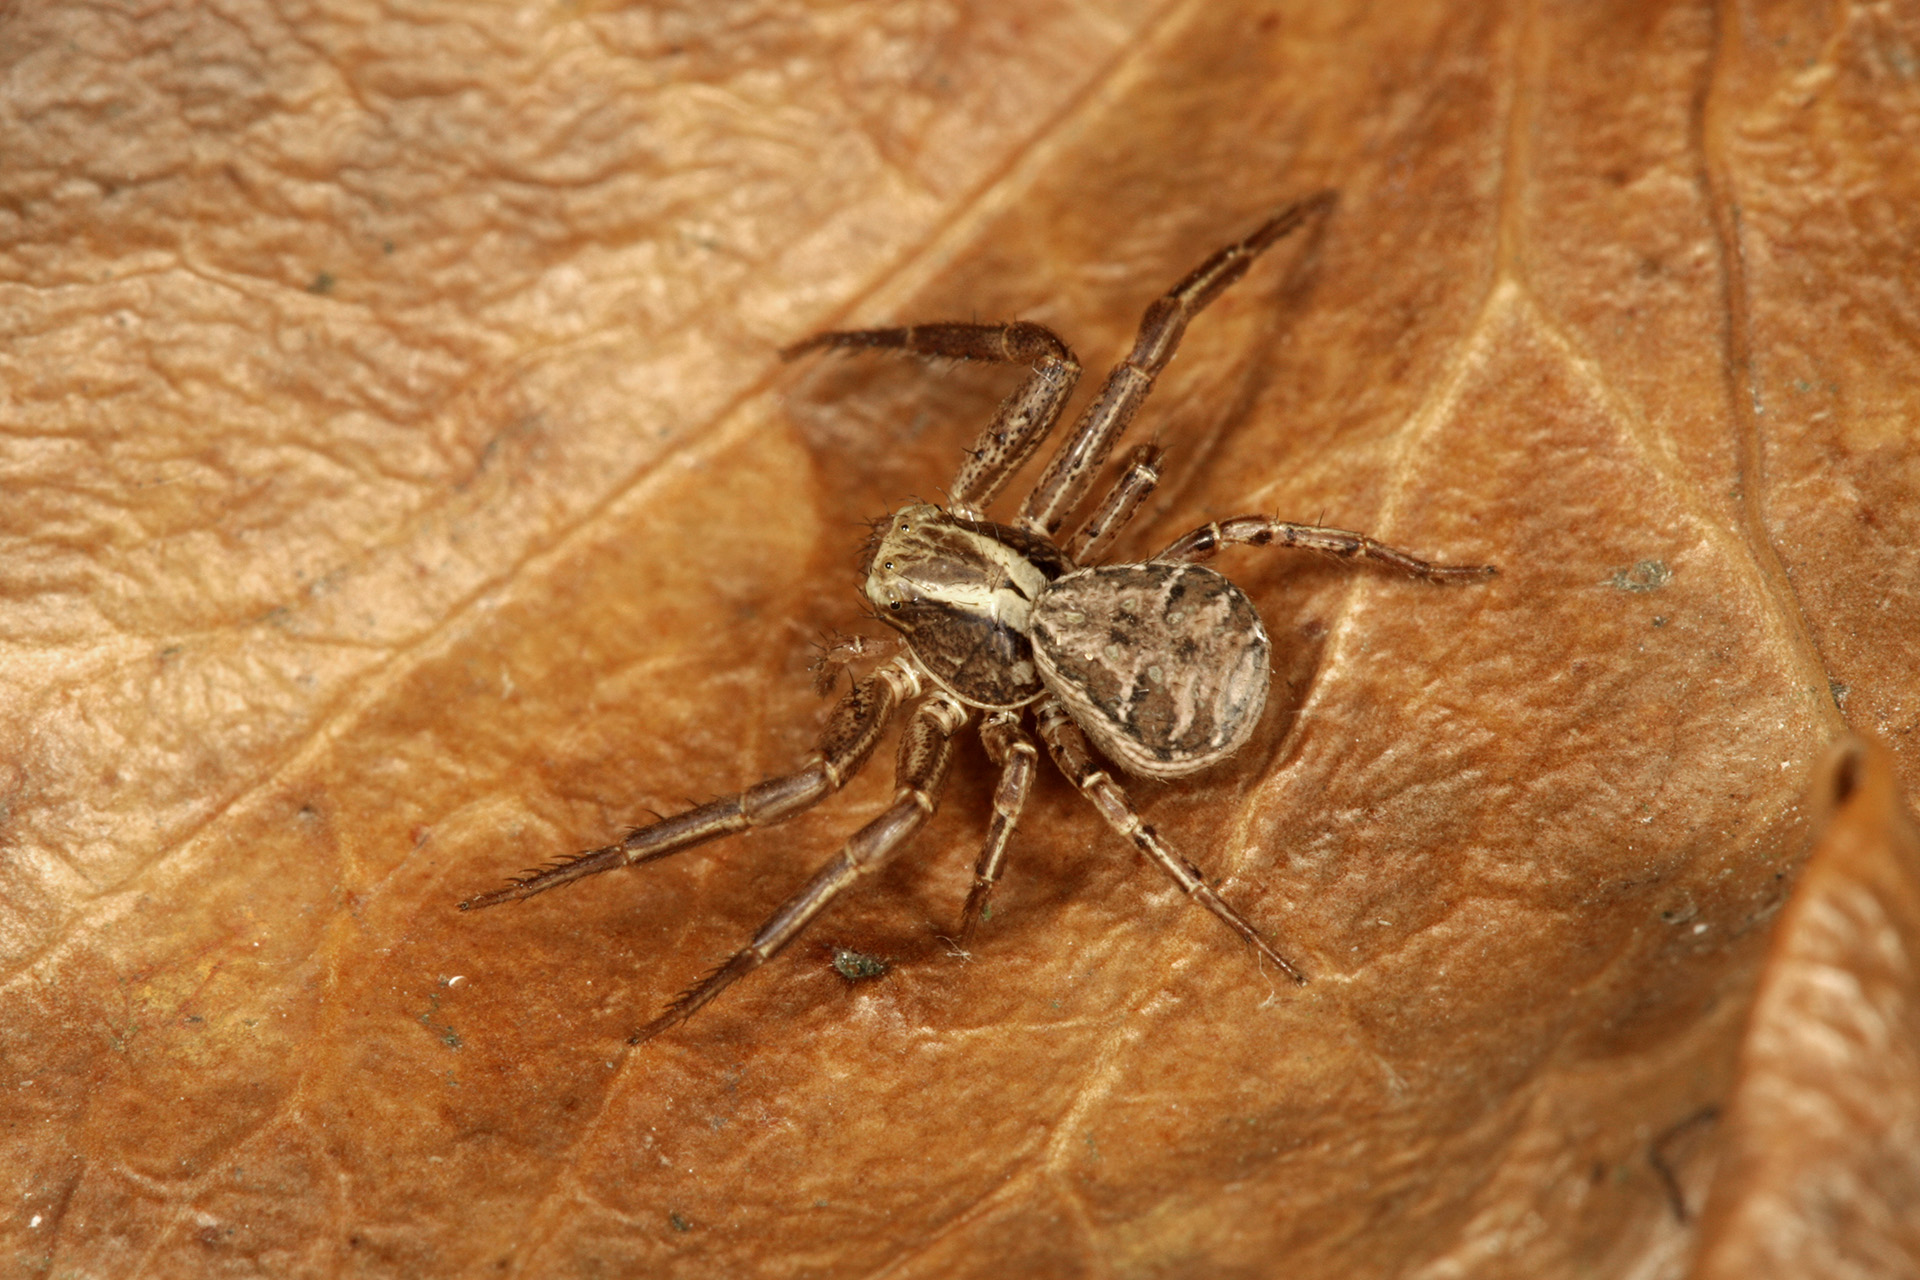 UK Common Types of House Spiders